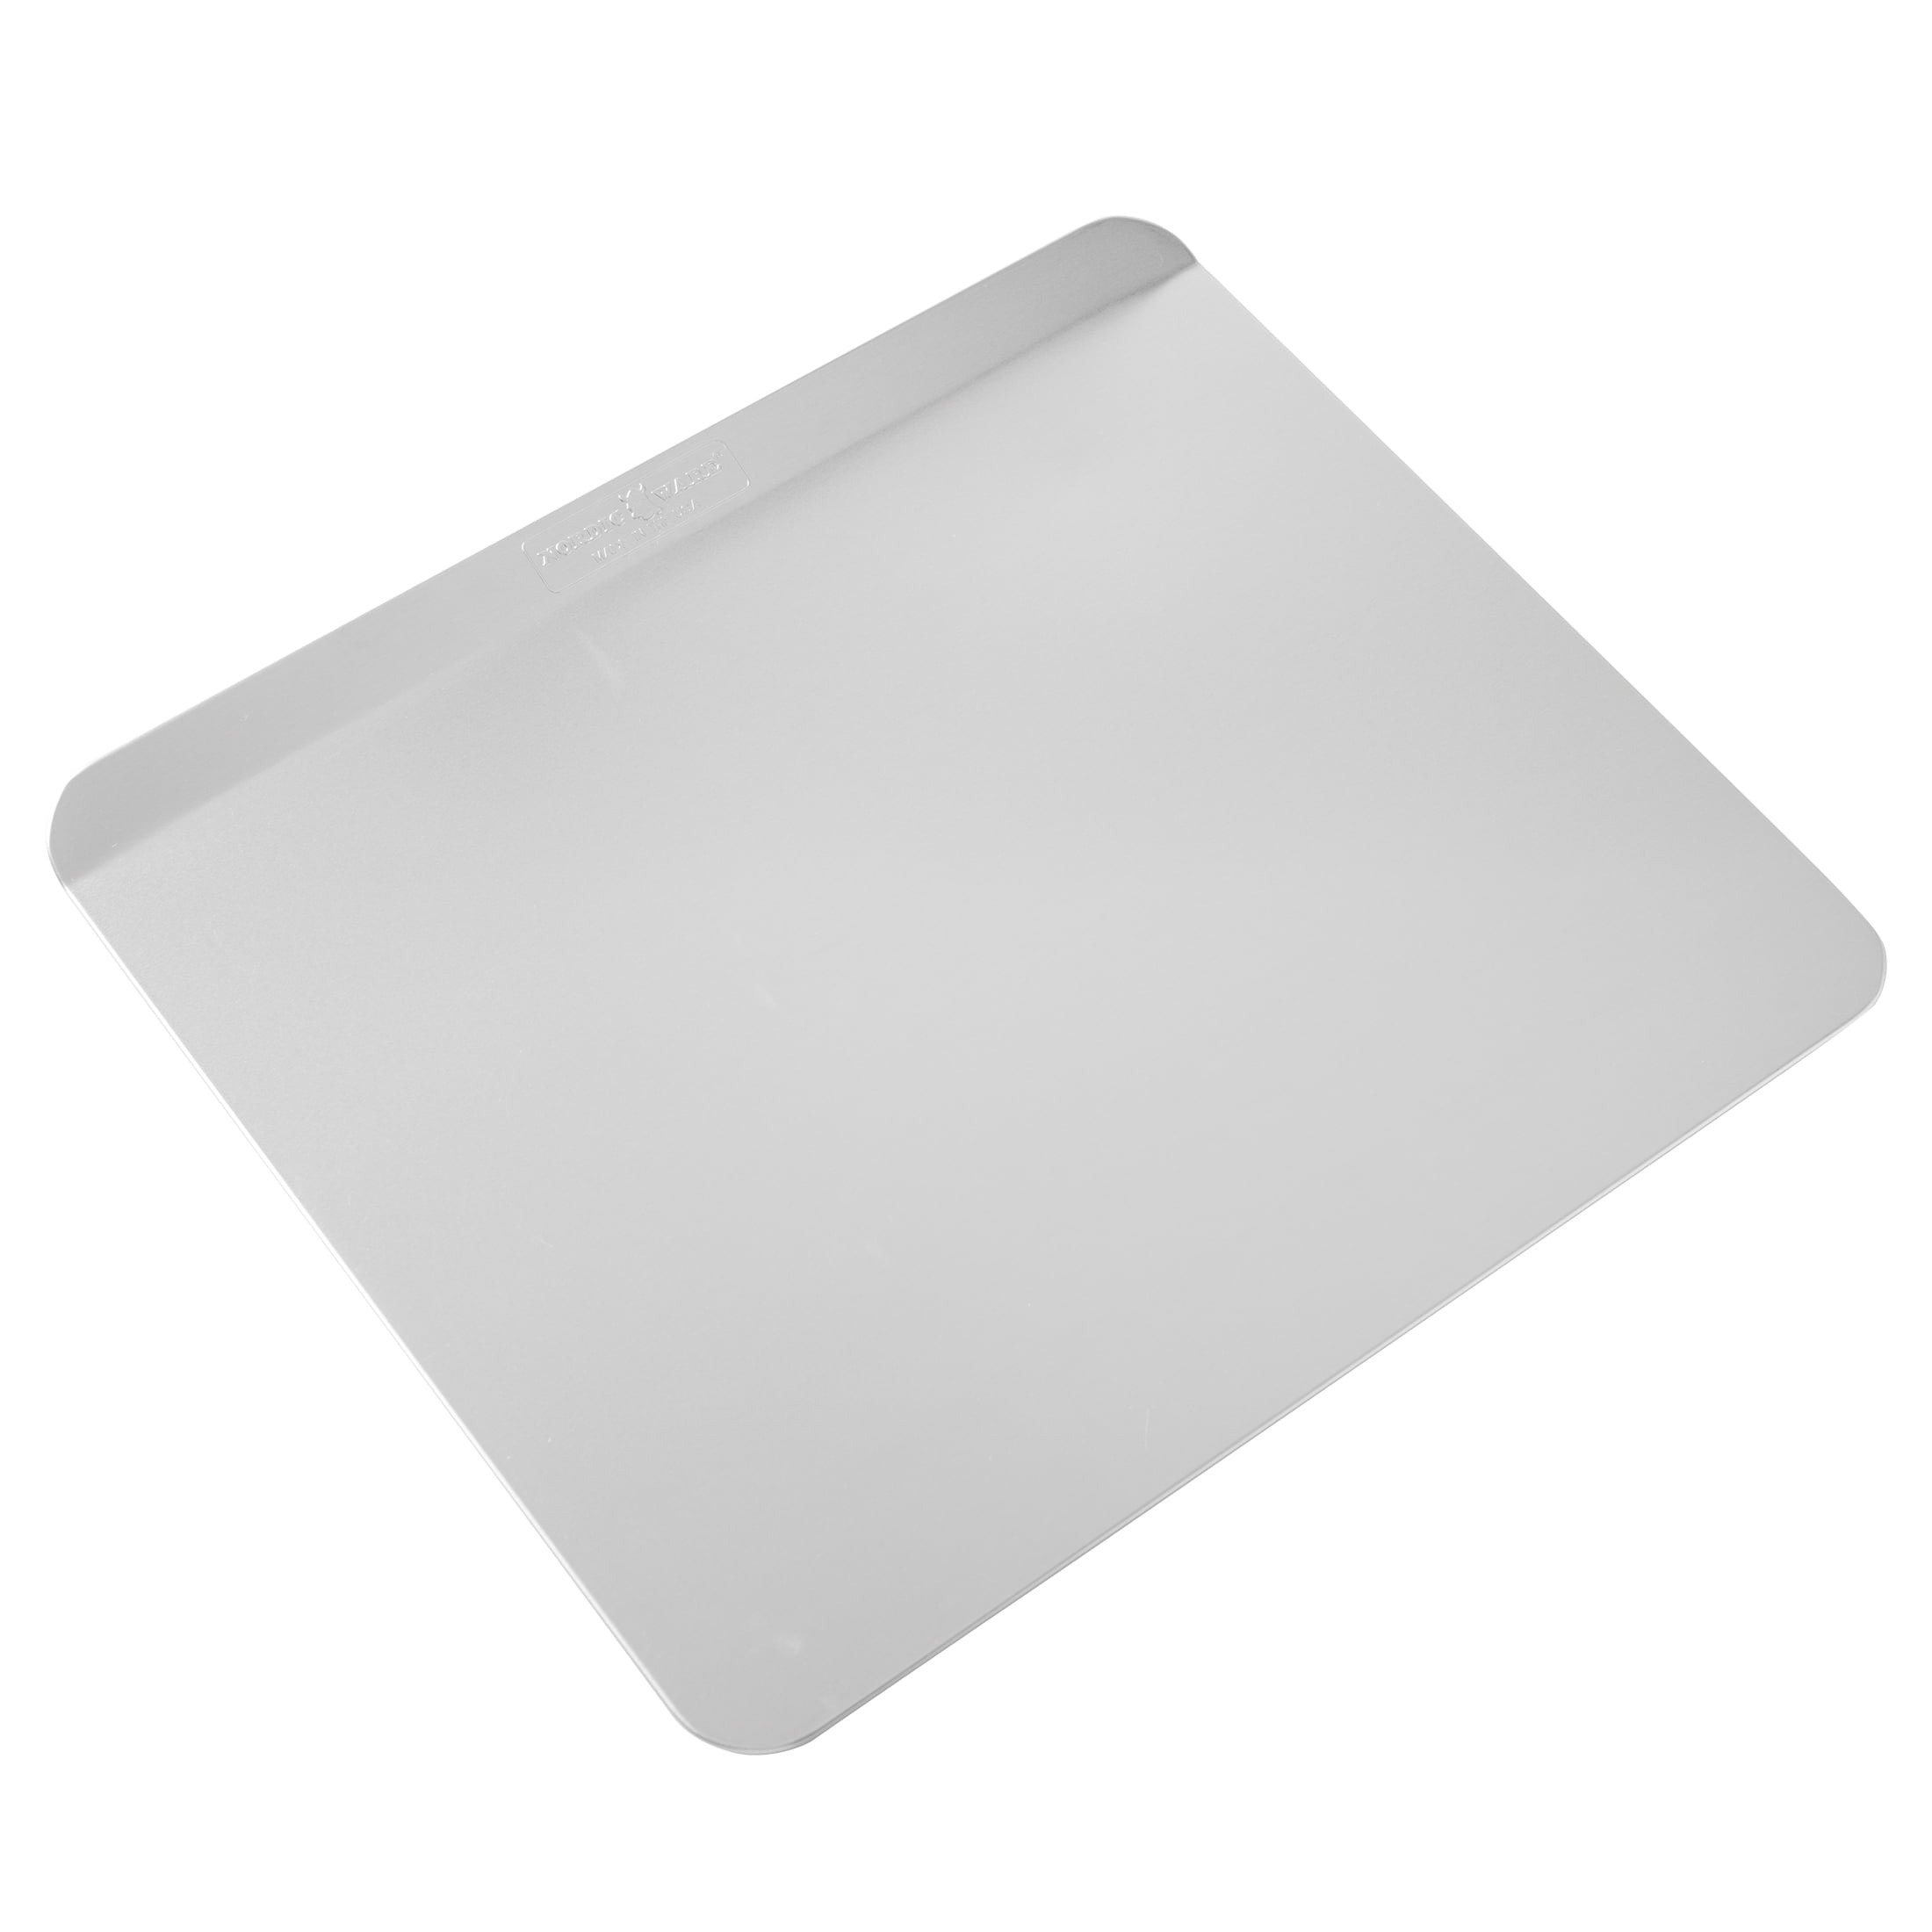 VER NICE - Insulated Cookie Sheet Aluminum One Edge 14x16 Large